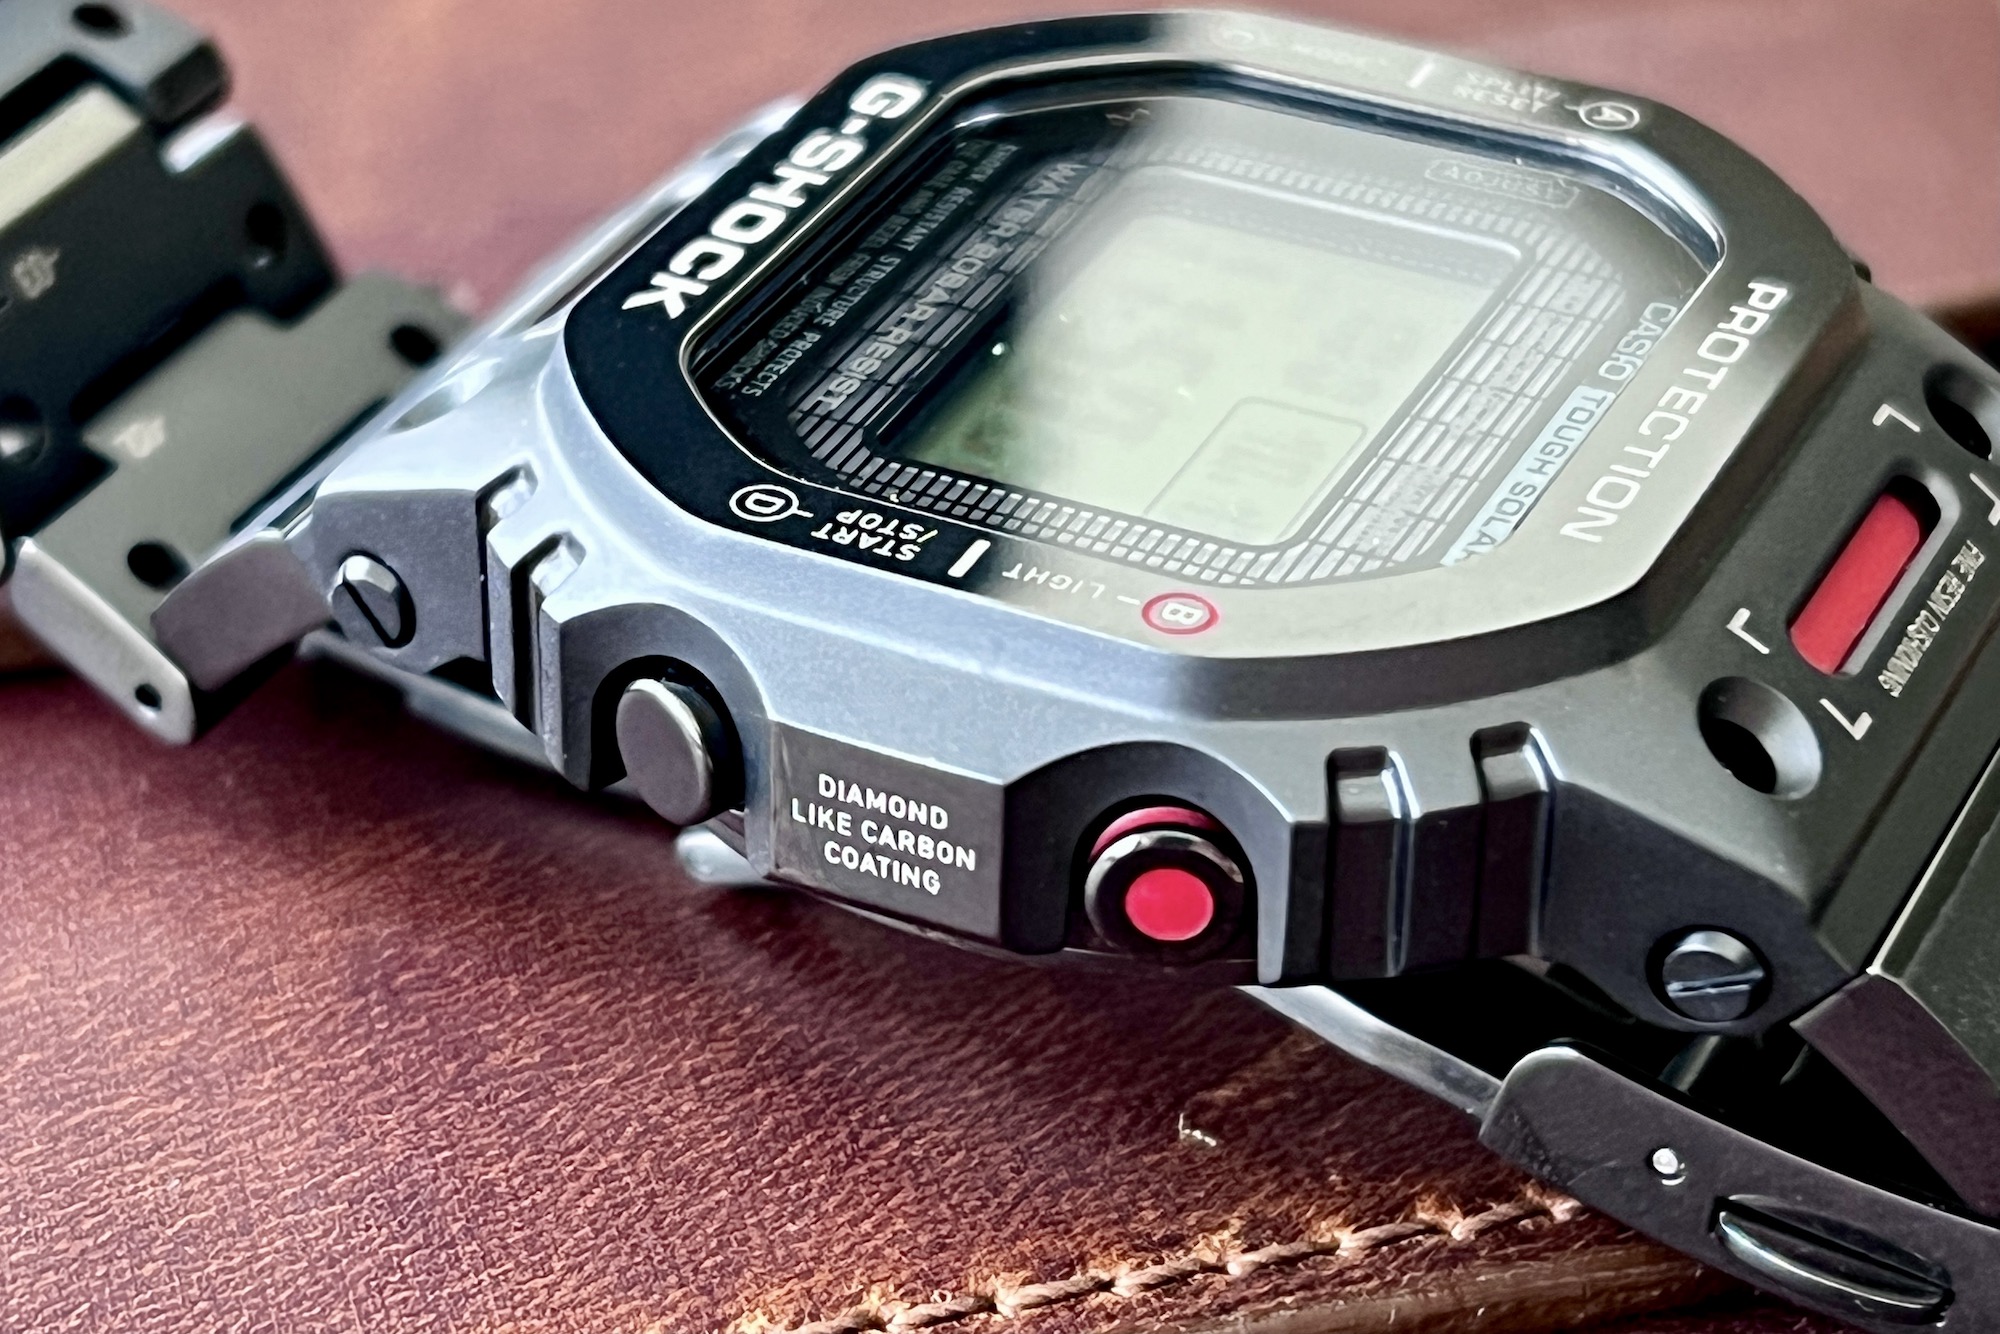 The G Shock GMWB5000TVA's buttons.